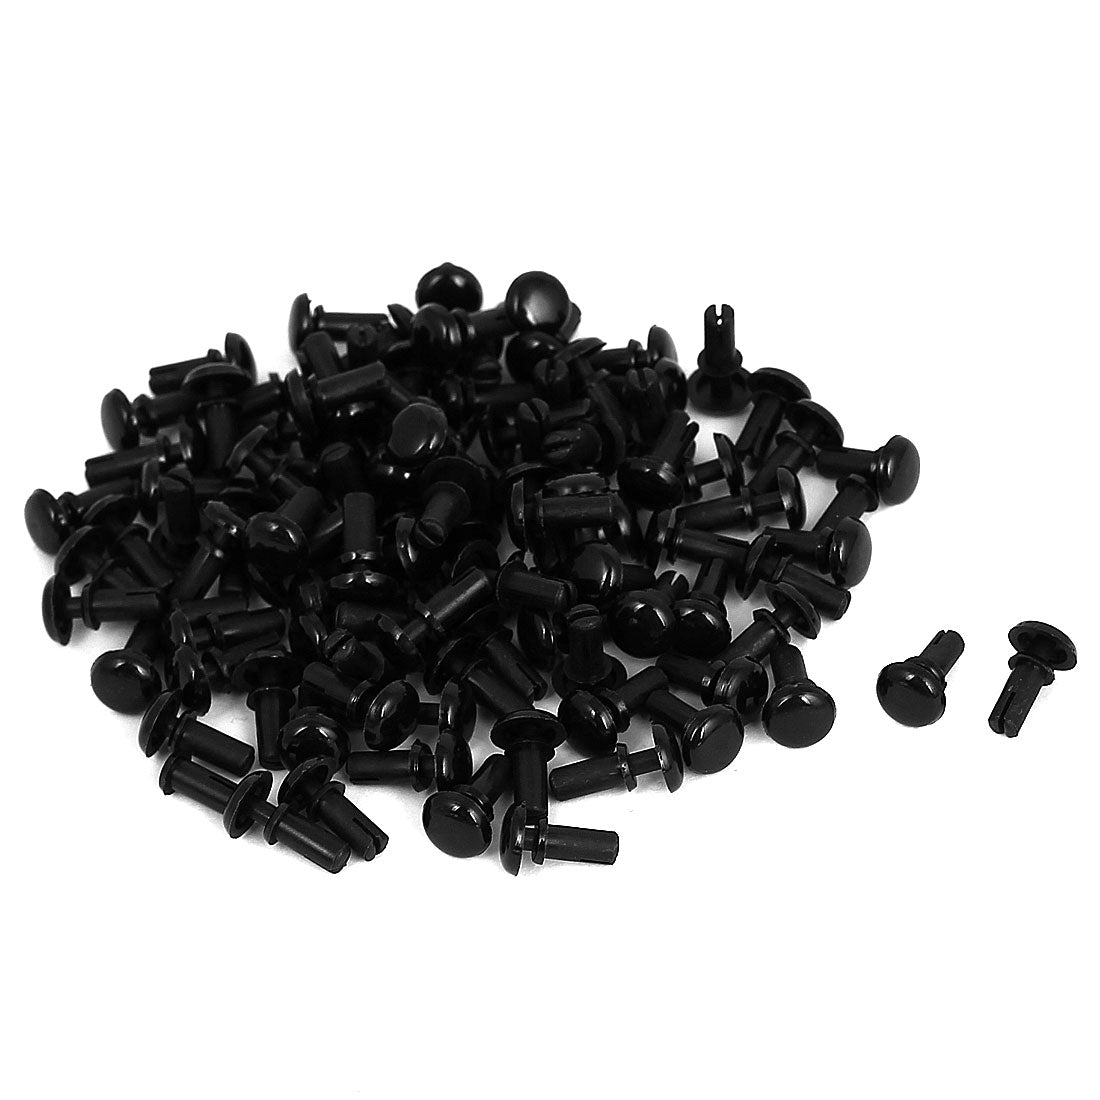 uxcell Uxcell 100Pcs Nylon Push Clips Rivet Fastener Black for 4-5mm Thickness Panel